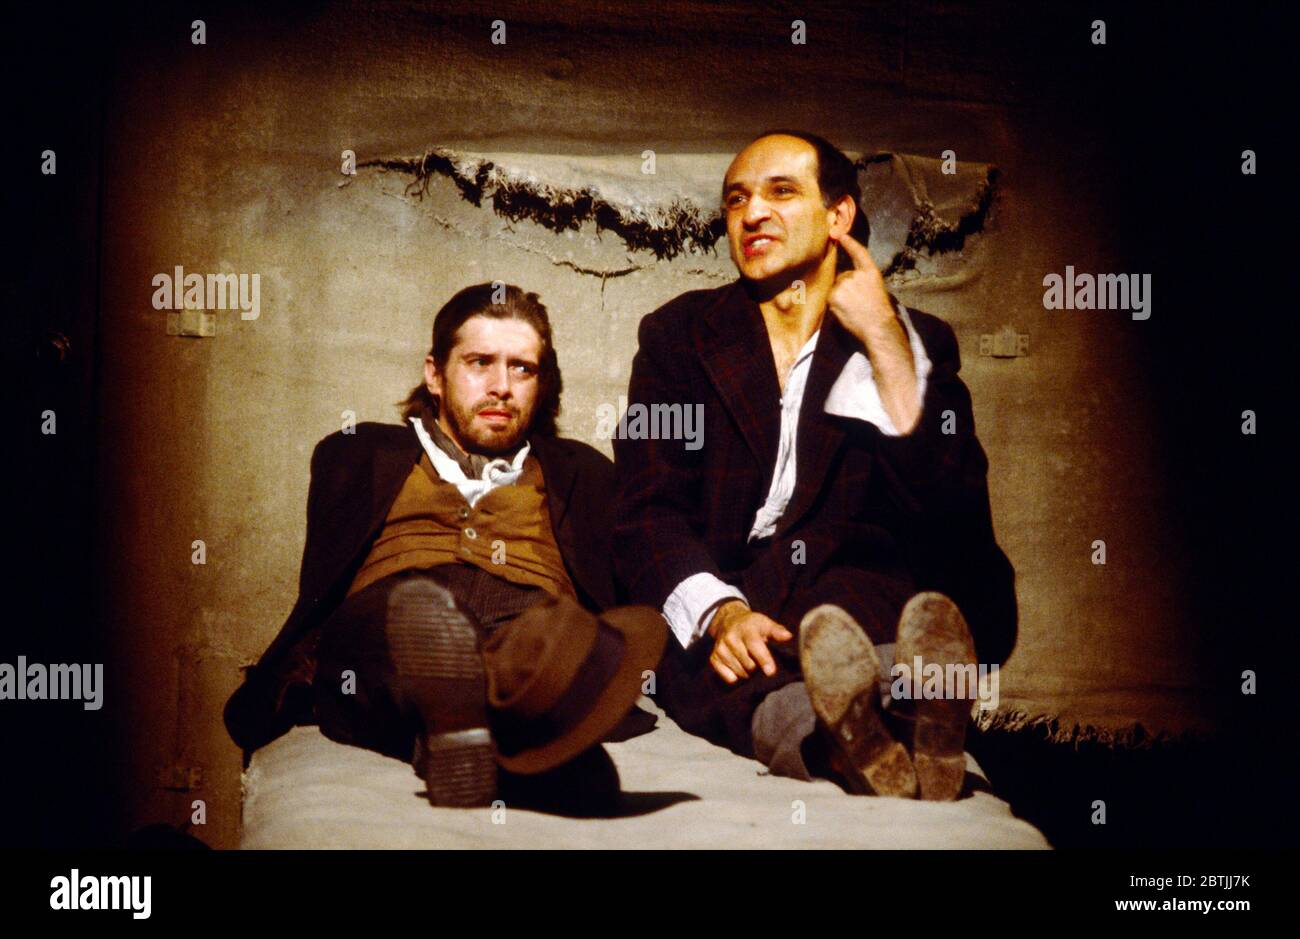 BAAL by Bertolt Brecht design: Ralph Koltai lighting: Leo Leibovici director: David Jones   l-r: Nigel Terry (Ekart), Ben Kingsley (Baal)  Royal Shakespeare Company (RSC) / The Other Place, Stratford-upon-Avon, England  01/08/1979                   (C) Donald Cooper/Photostage   photos@photostage.co.uk   ref/CT-01 Stock Photo